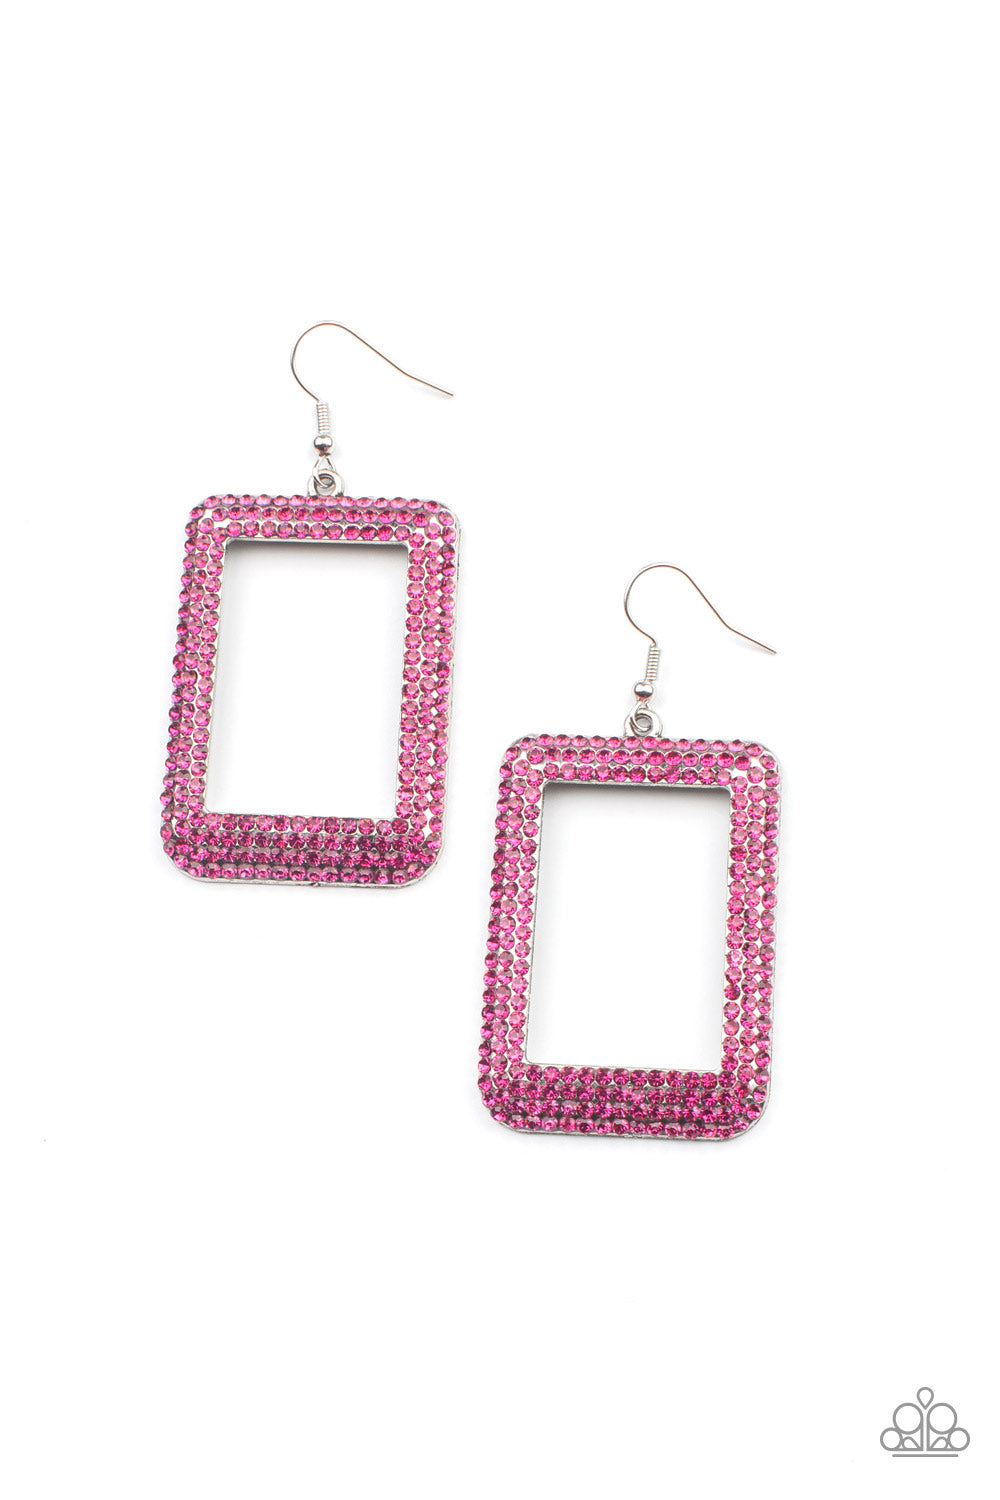 World FRAME-ous - Pink Earrings- Paparazzi Accessories - Paparazzi Accessories 